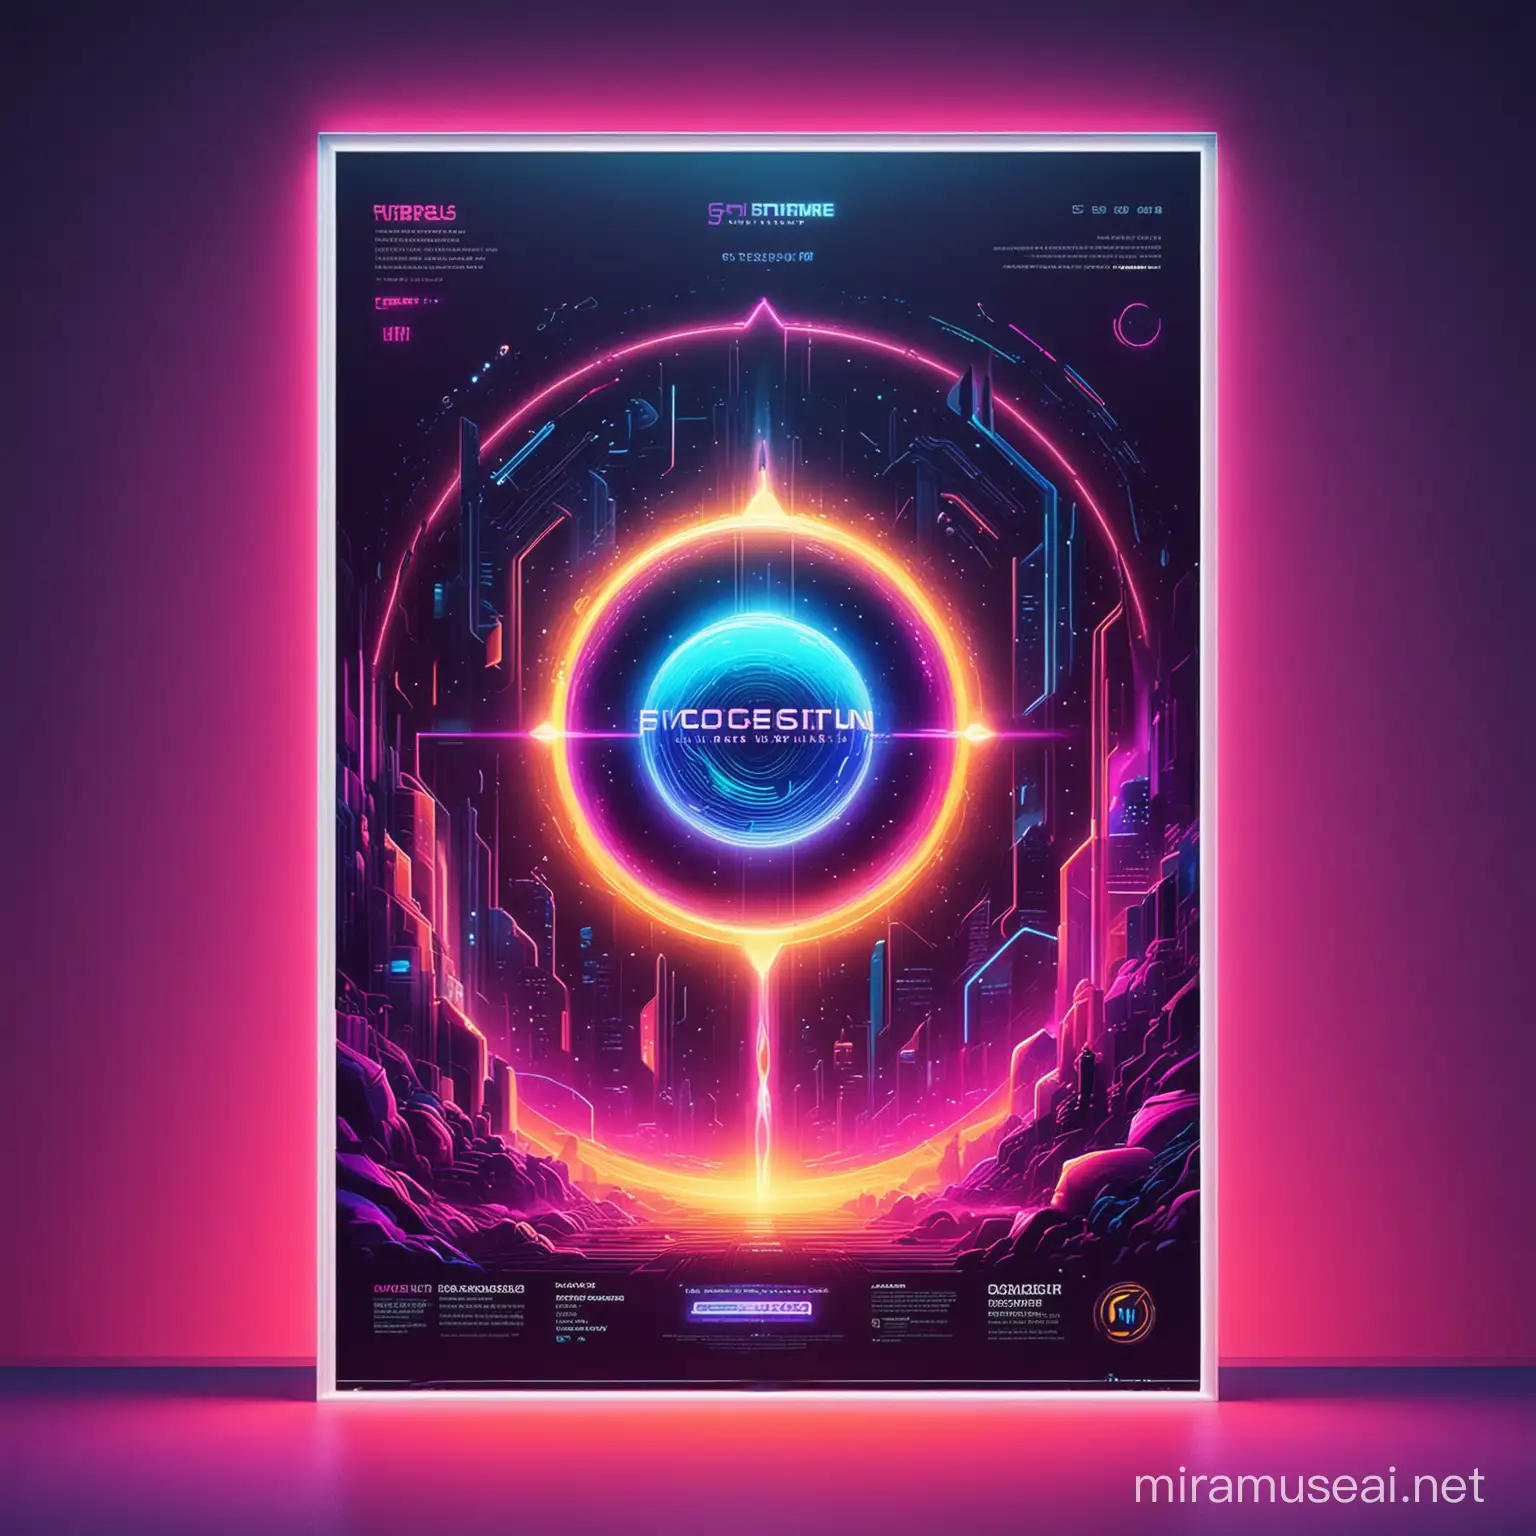 Generate a futuristic and vibrant poster with neon colors representing the launch of my portfolio website on my own domain with HTTPS security. The poster should exude excitement and innovation, showcasing a digital landscape or abstract futuristic elements. Avoid including any text in the image. The style should be dynamic and eye-catching, suitable for sharing on social media platforms like Instagram.